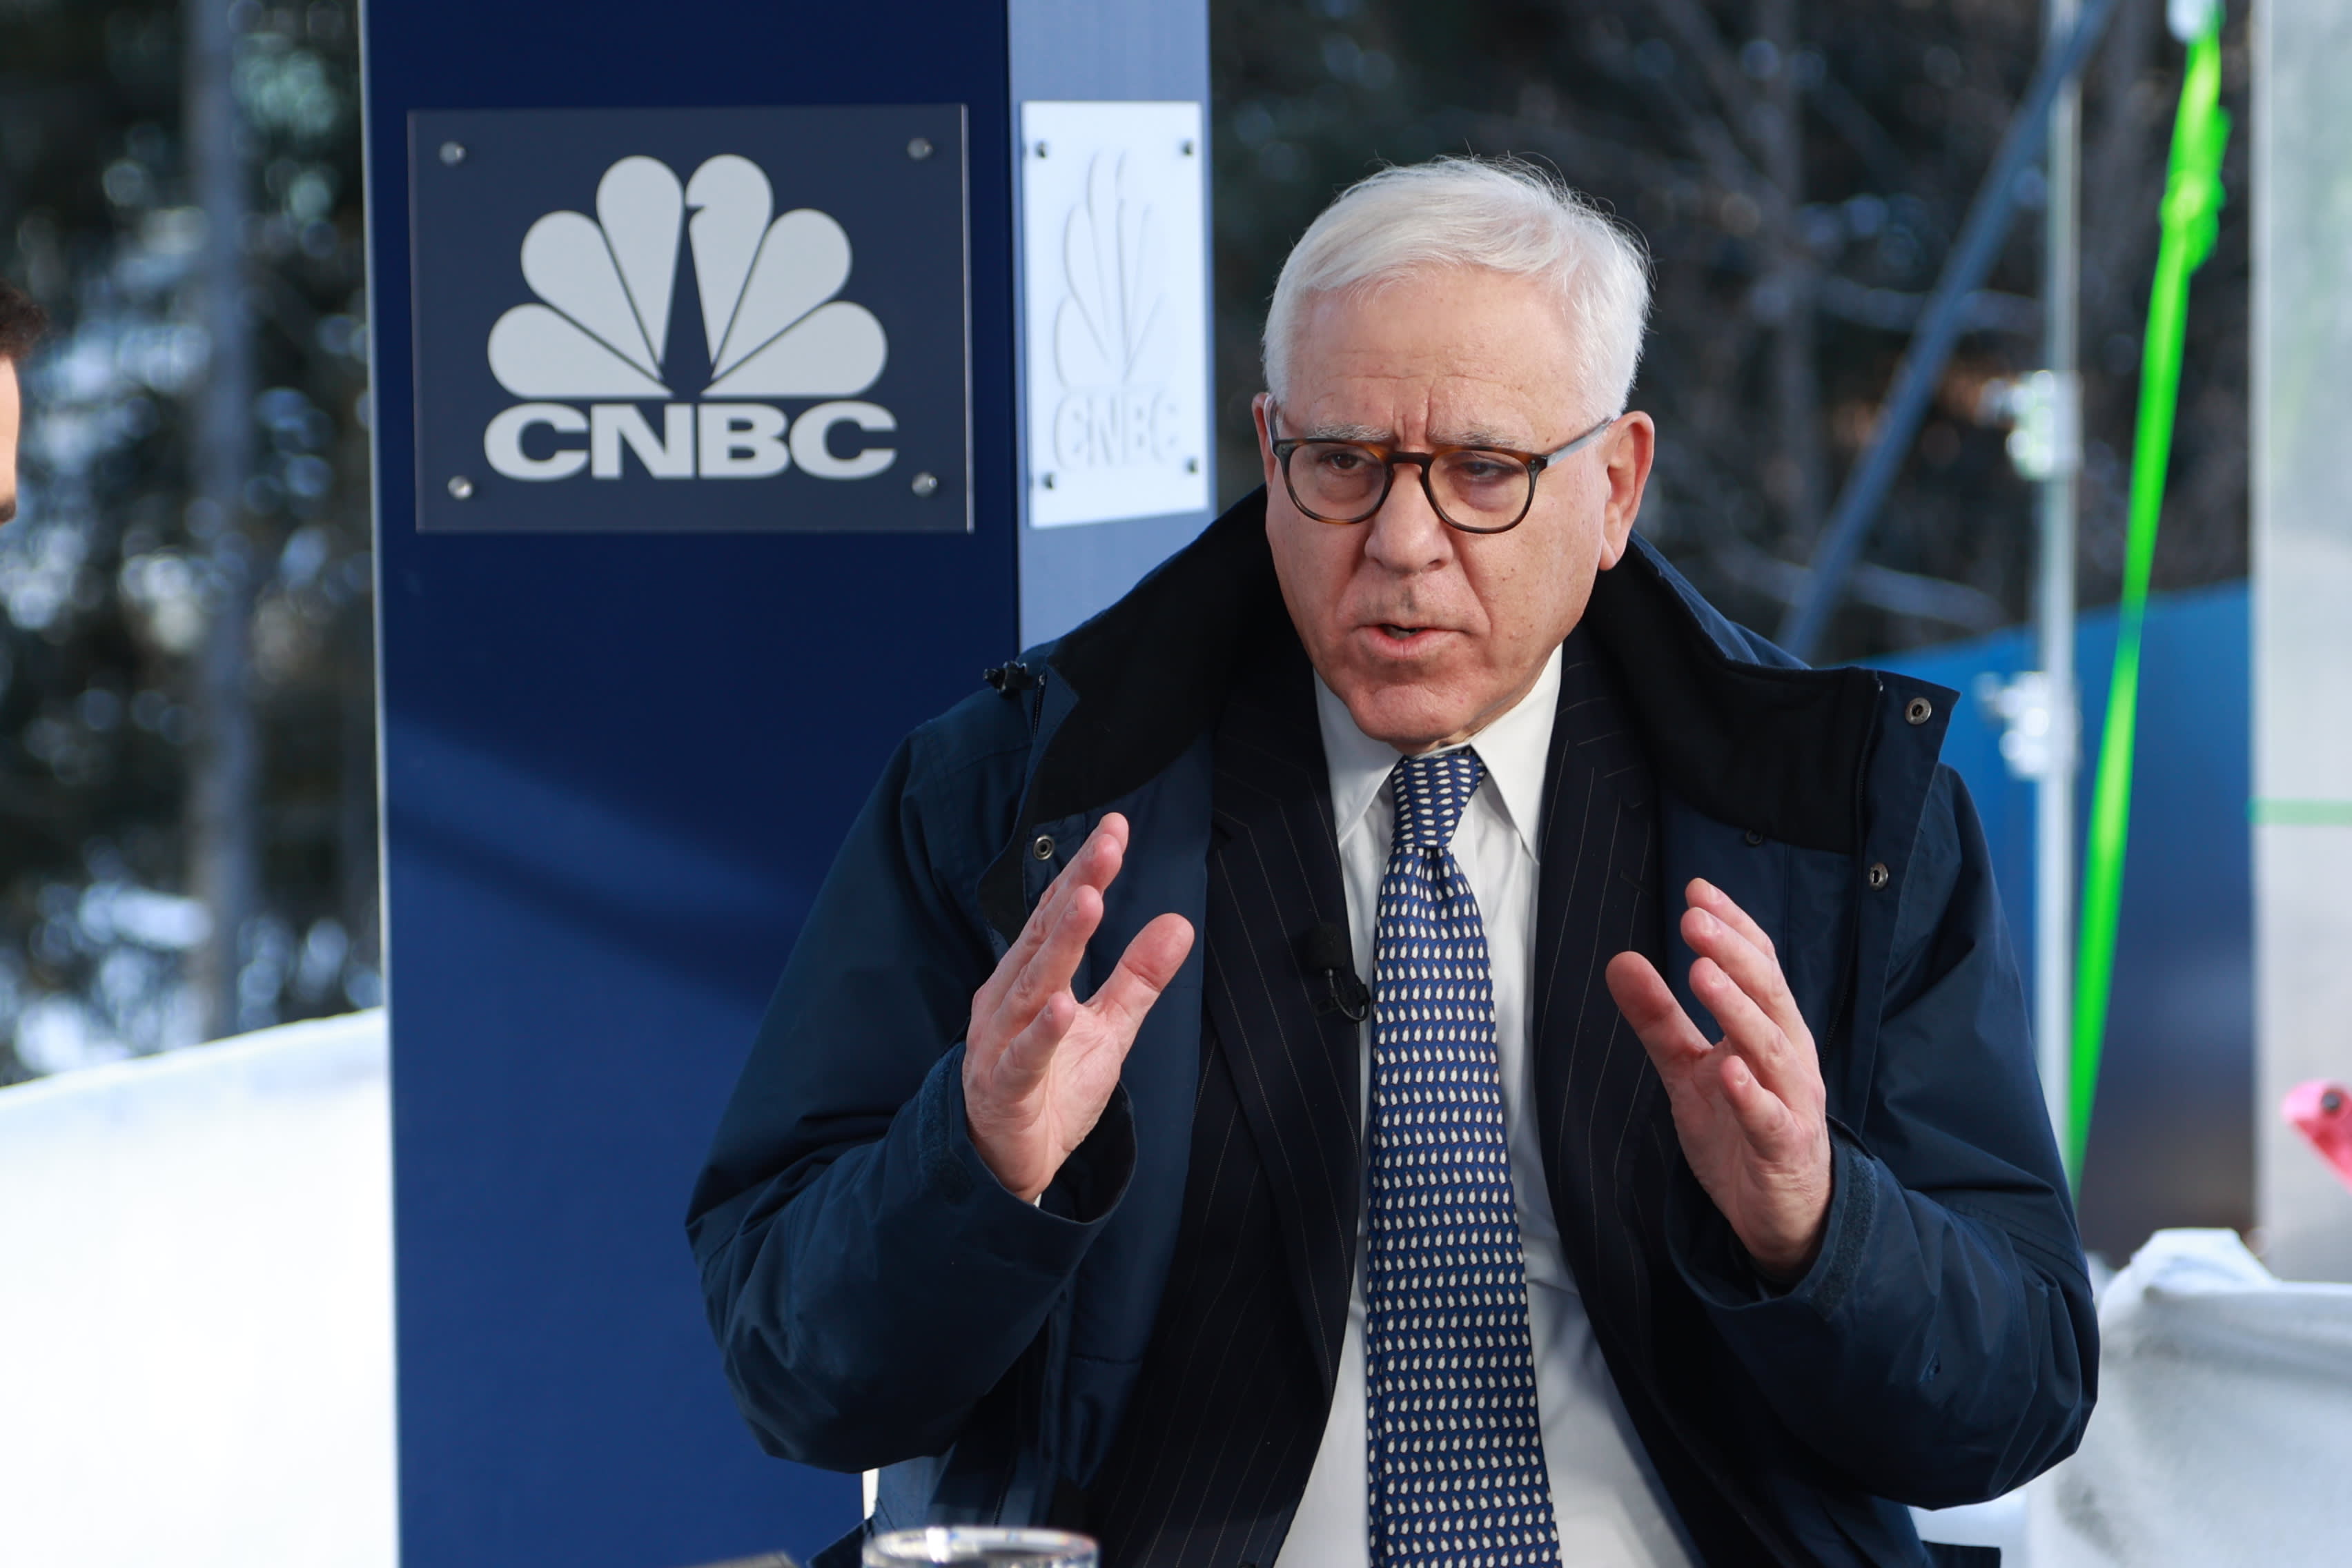 Here's why Carlyle Group's Rubenstein says now is a good time to invest